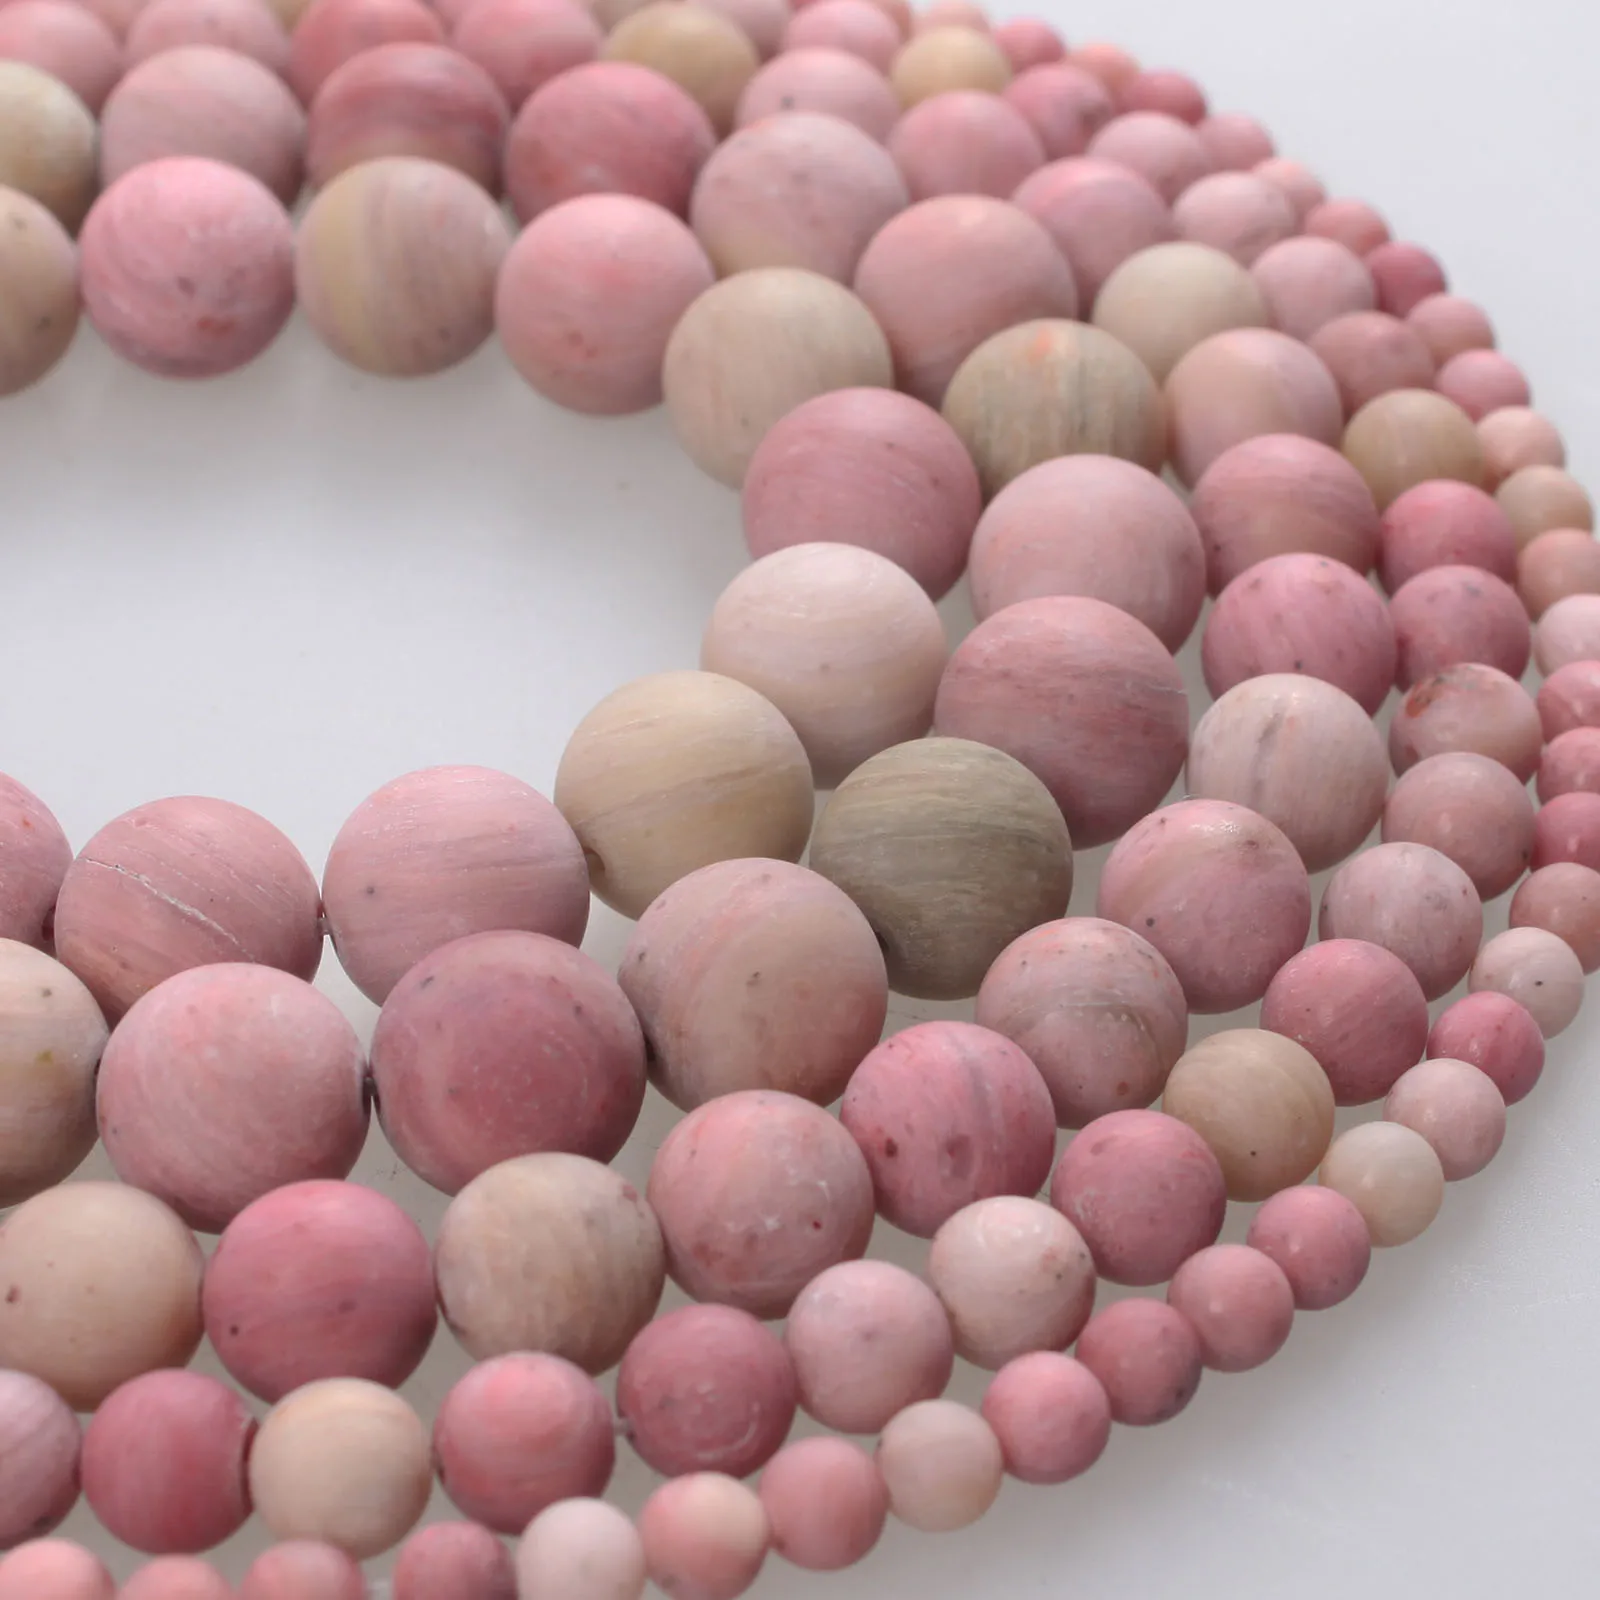 

100% Natural Stone Matted Rhodonite Frosted Rhodonite Beads Round Loose Beads 4 6 8 10 12mm Beads For Bracelets Jewelry Making